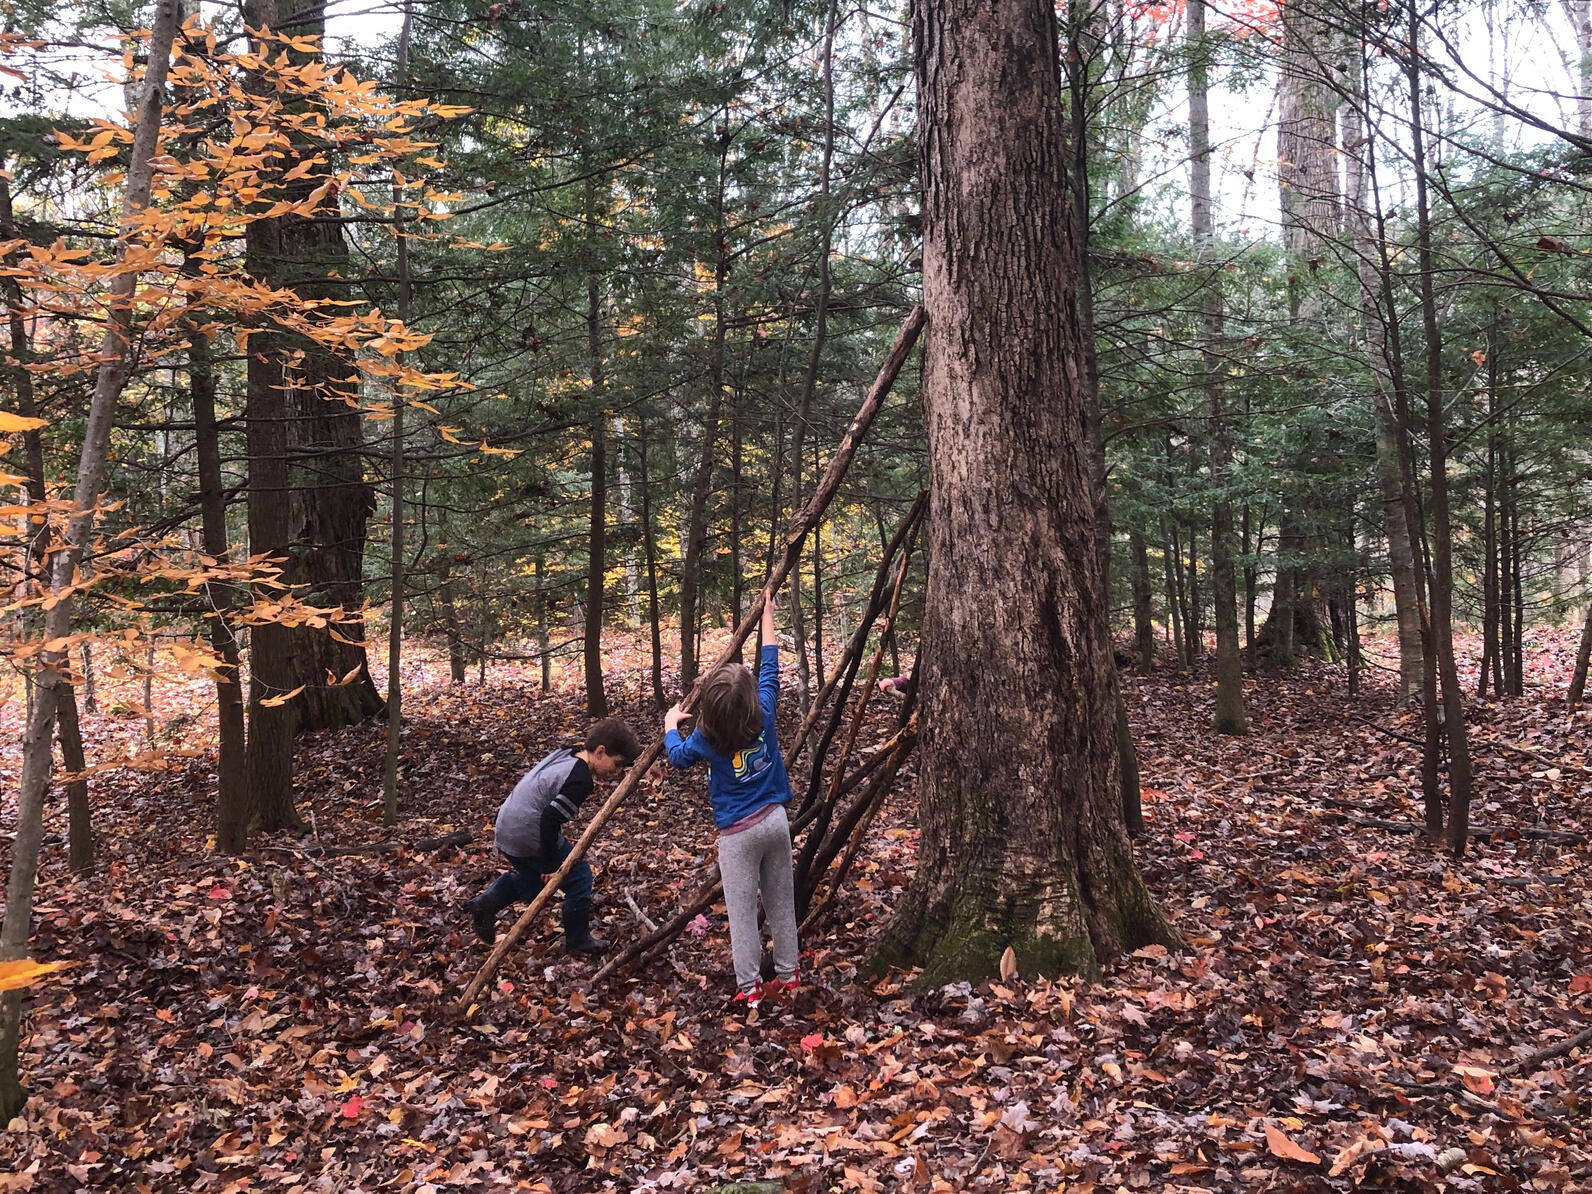 Two children in the forest leaning long sticks on a tree to build a fort